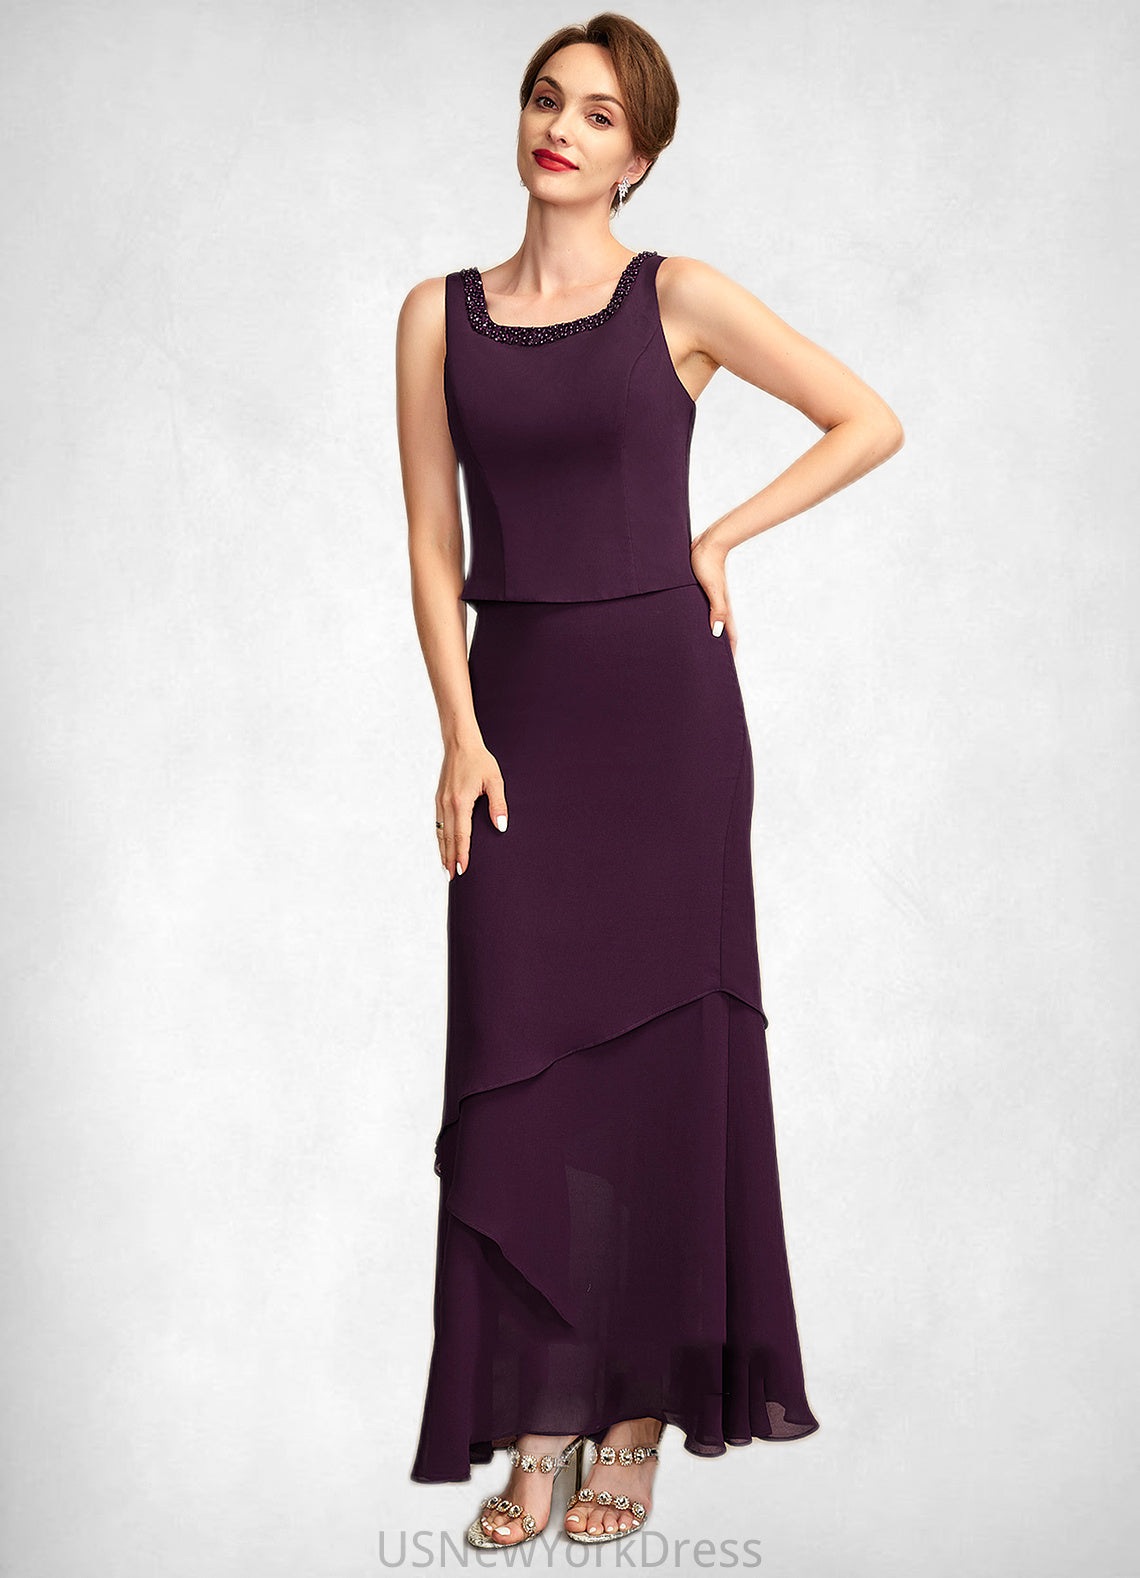 Ruby Sheath/Column Scoop Neck Ankle-Length Chiffon Mother of the Bride Dress With Beading Sequins DJ126P0015024